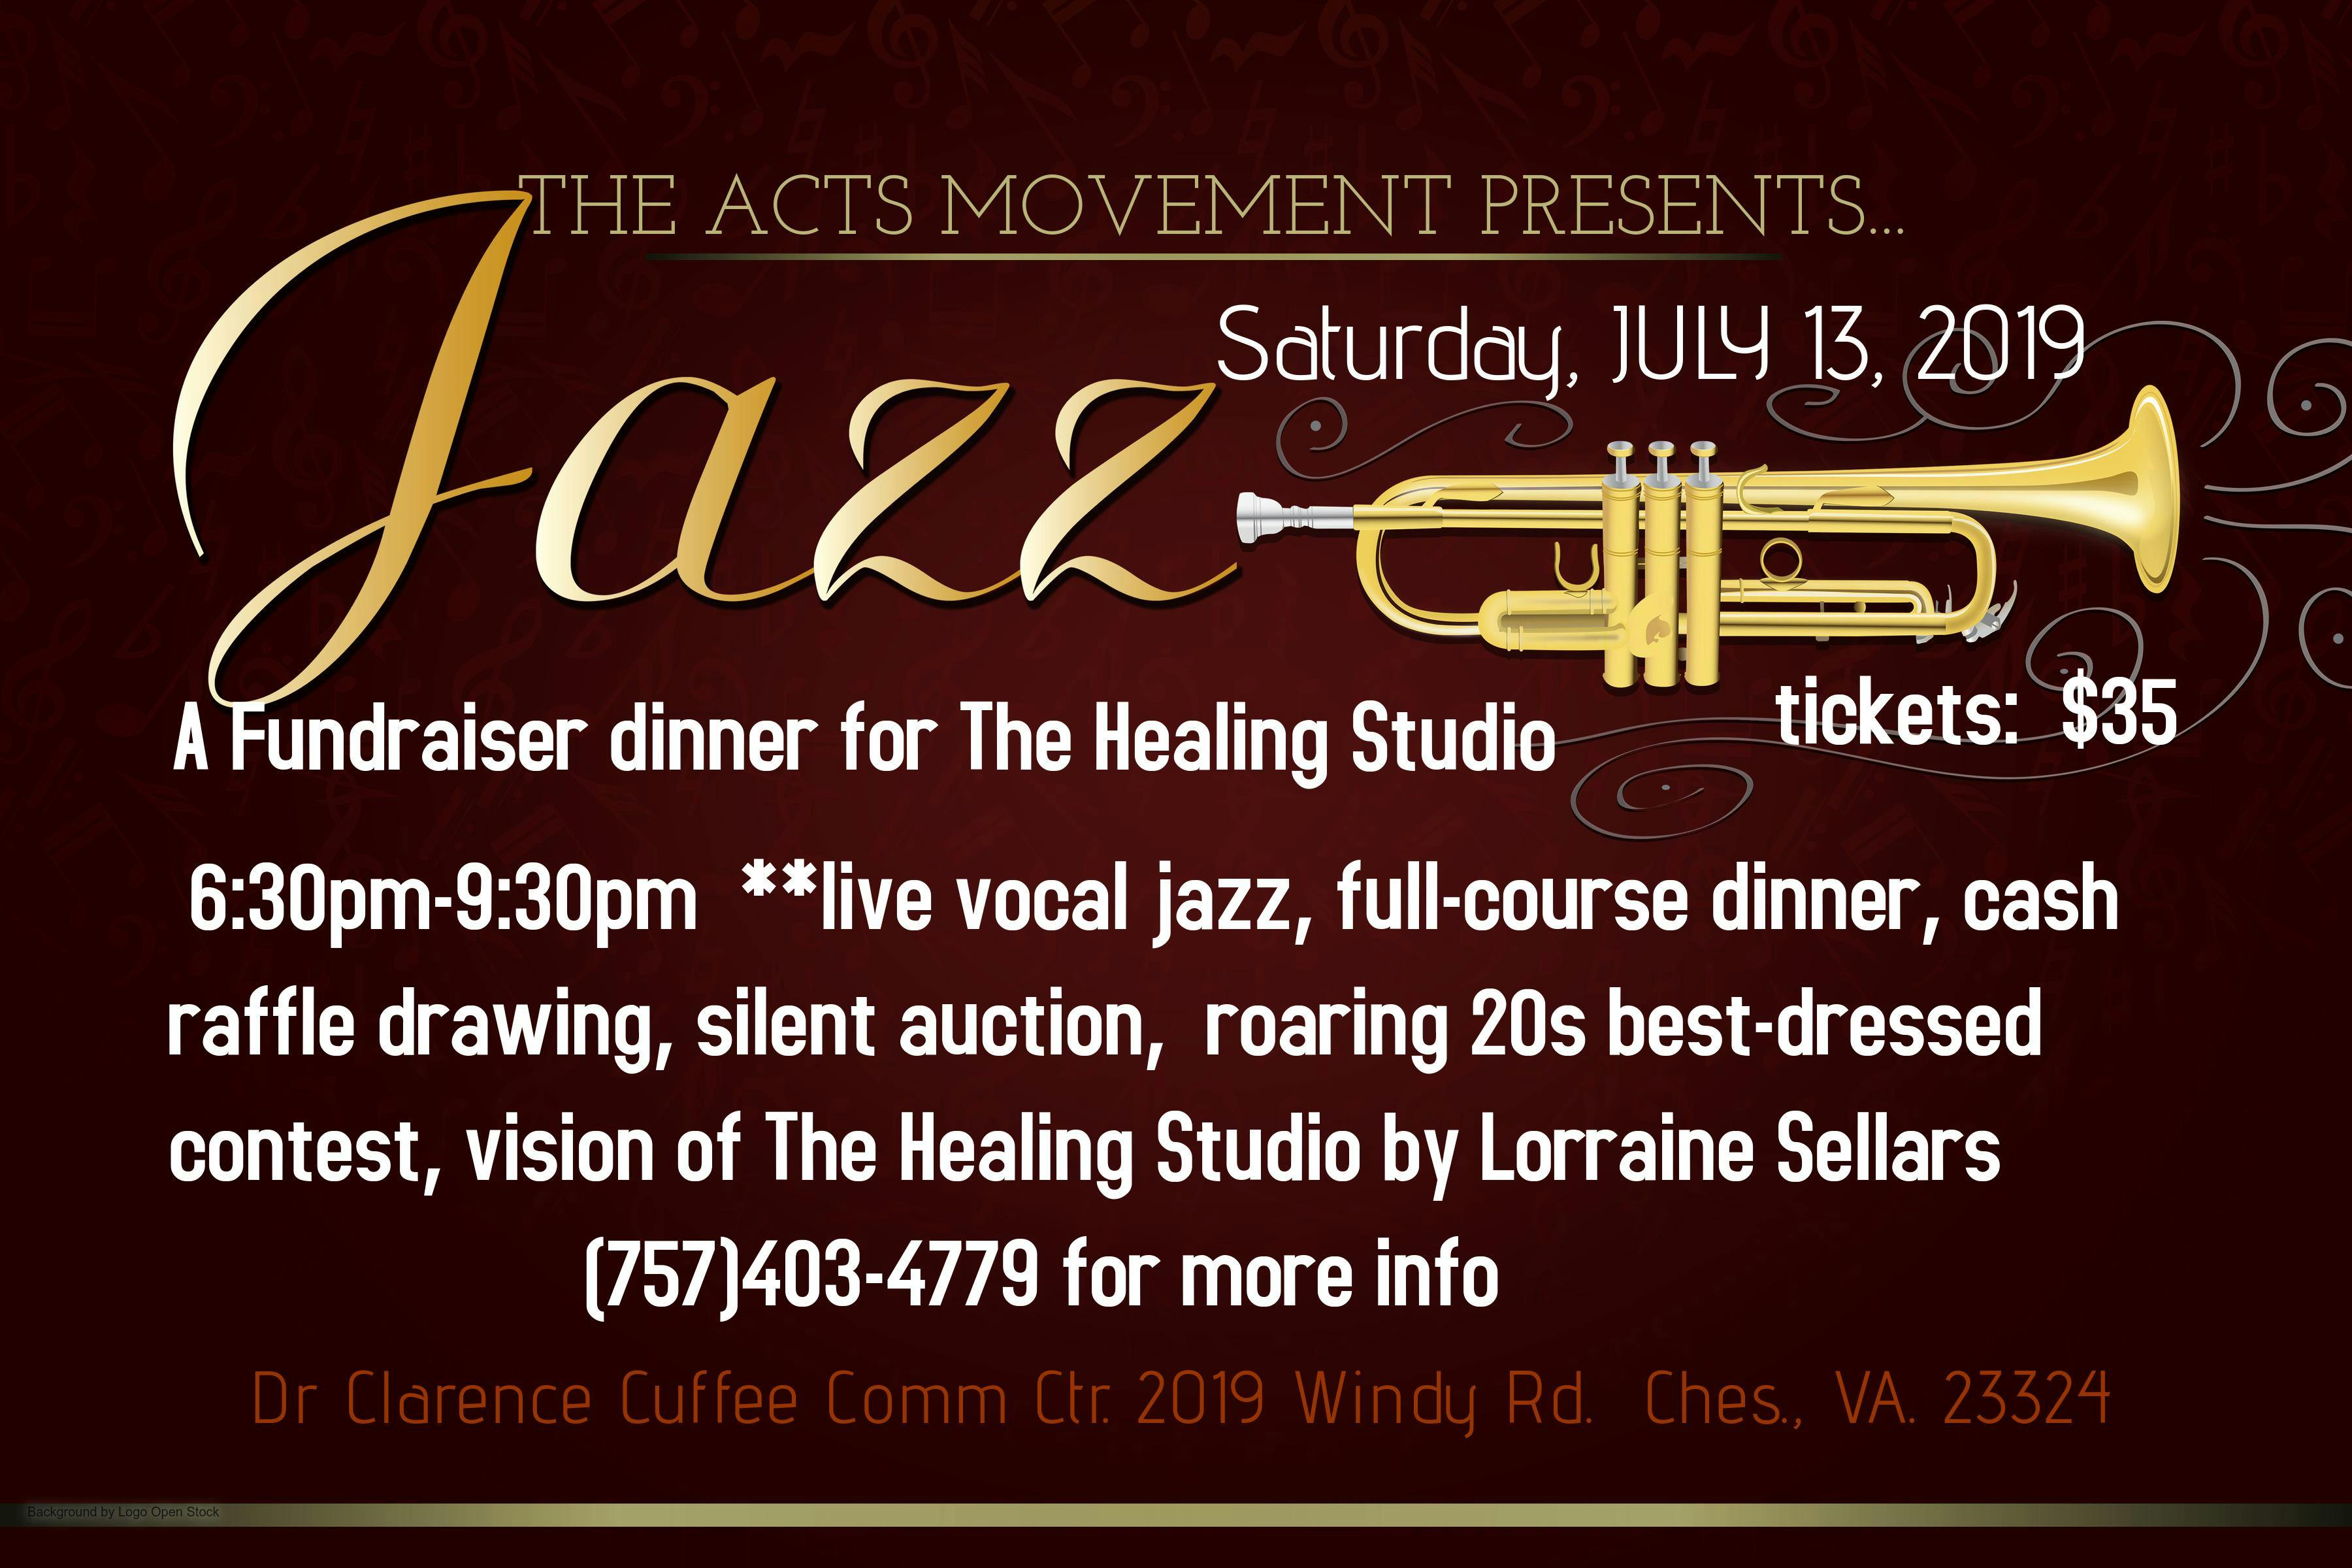 The Acts Movement Jazz Fundraiser Dinner